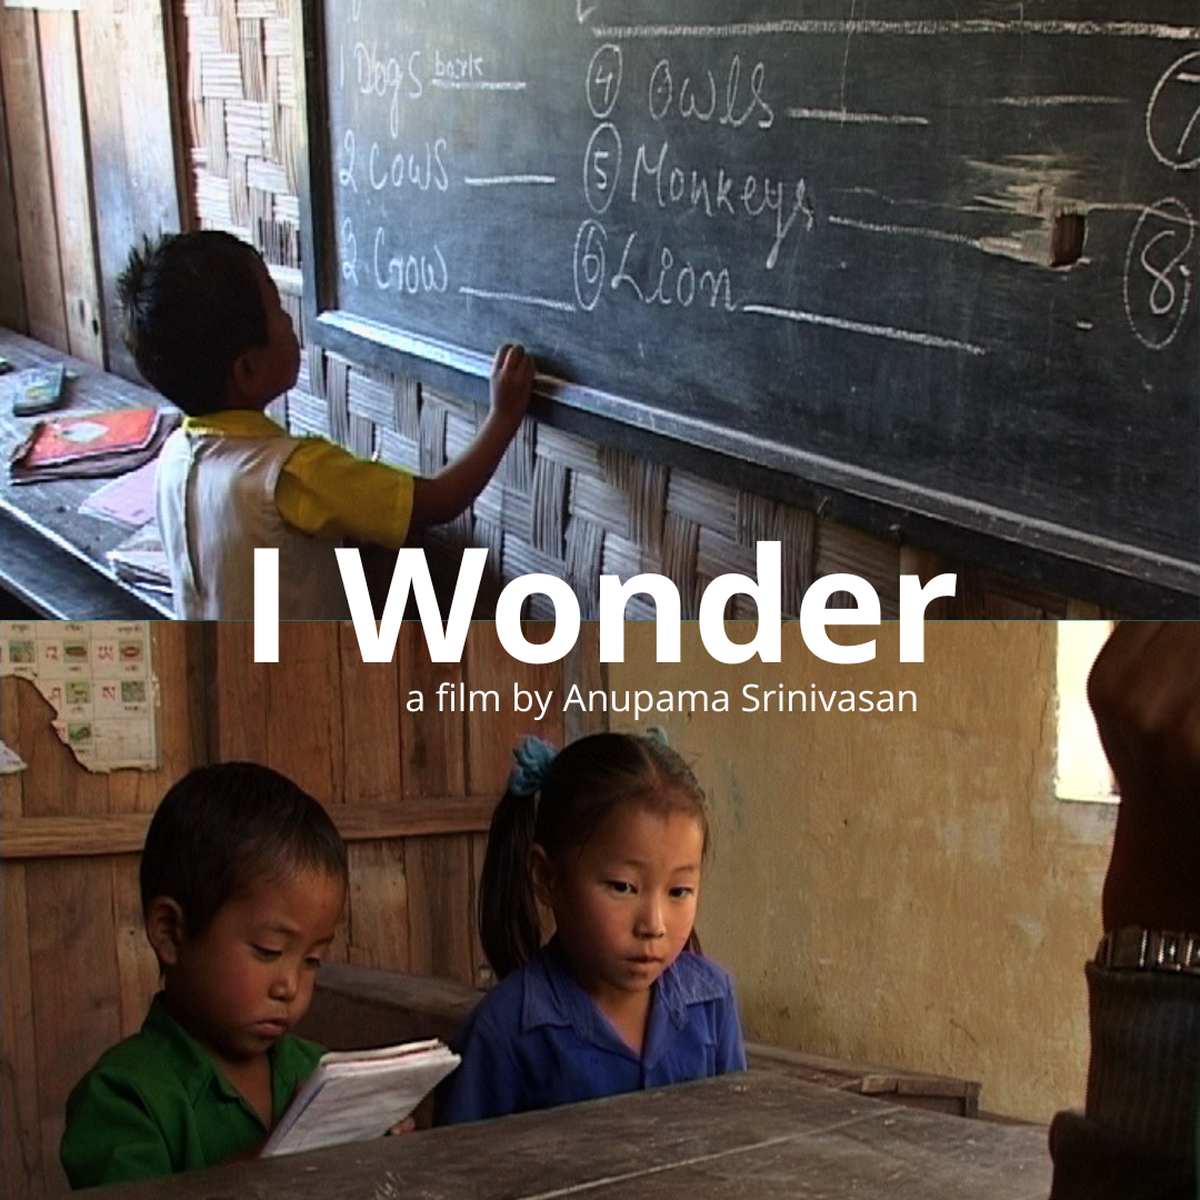 Poster of ‘I Wonder’, a film being screened at Chalshiksha, an education film festival in Bengaluru from Septermbe 23-25, 2022.  